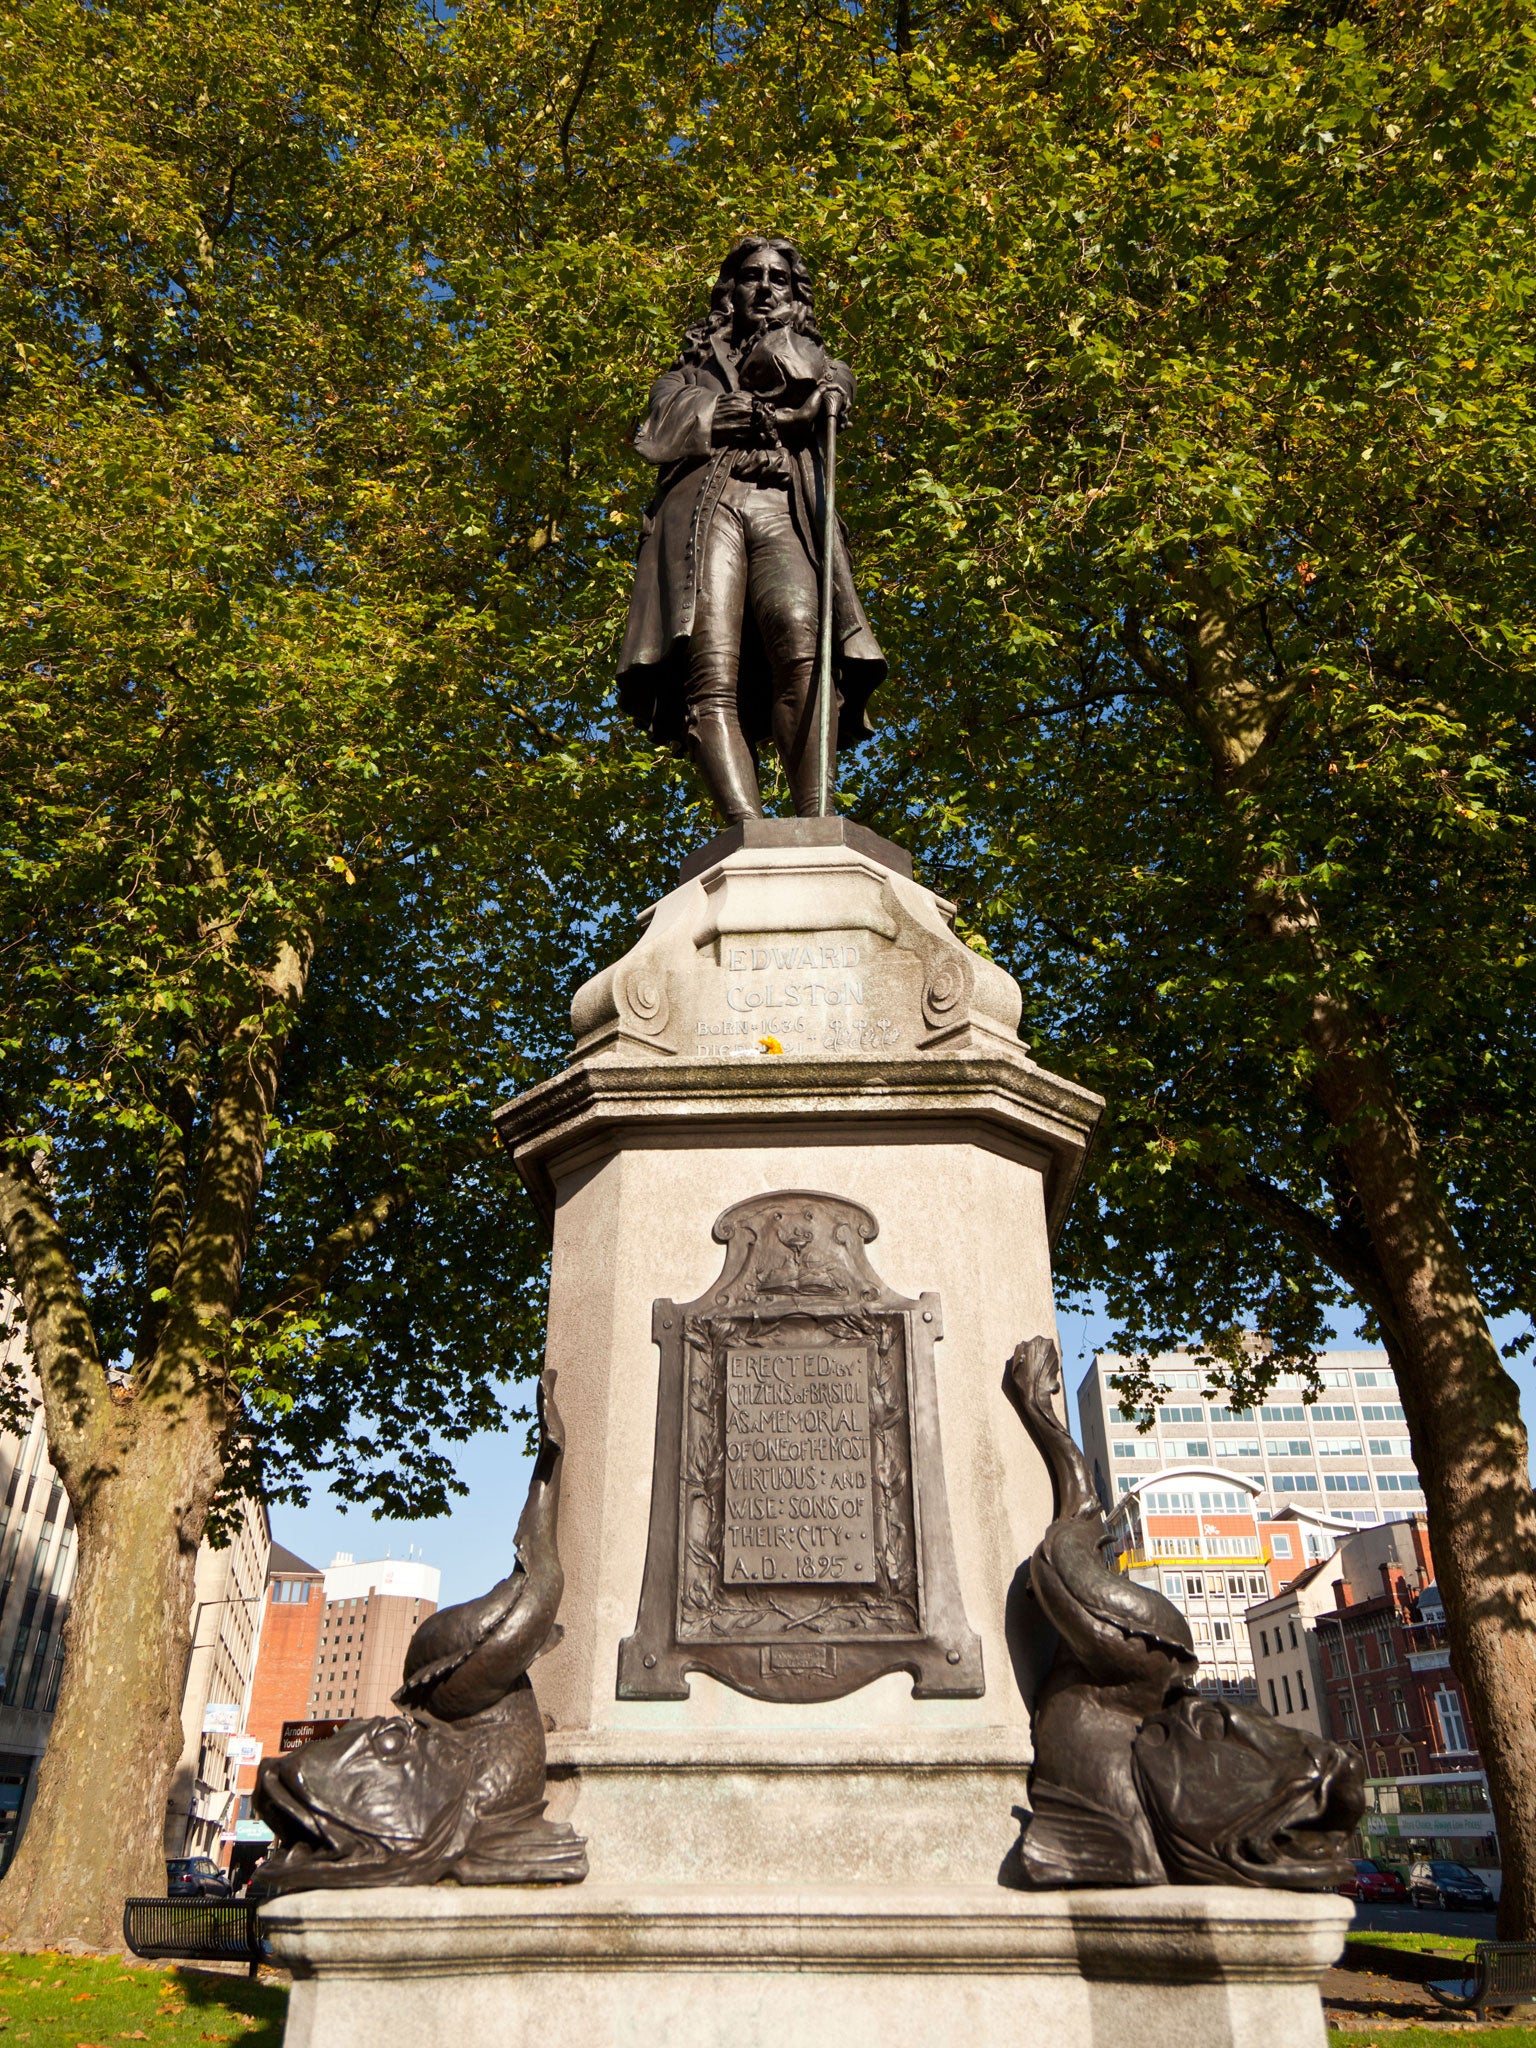 Edward Colston’s statue in Bristol. Much of his wealth came from slavery